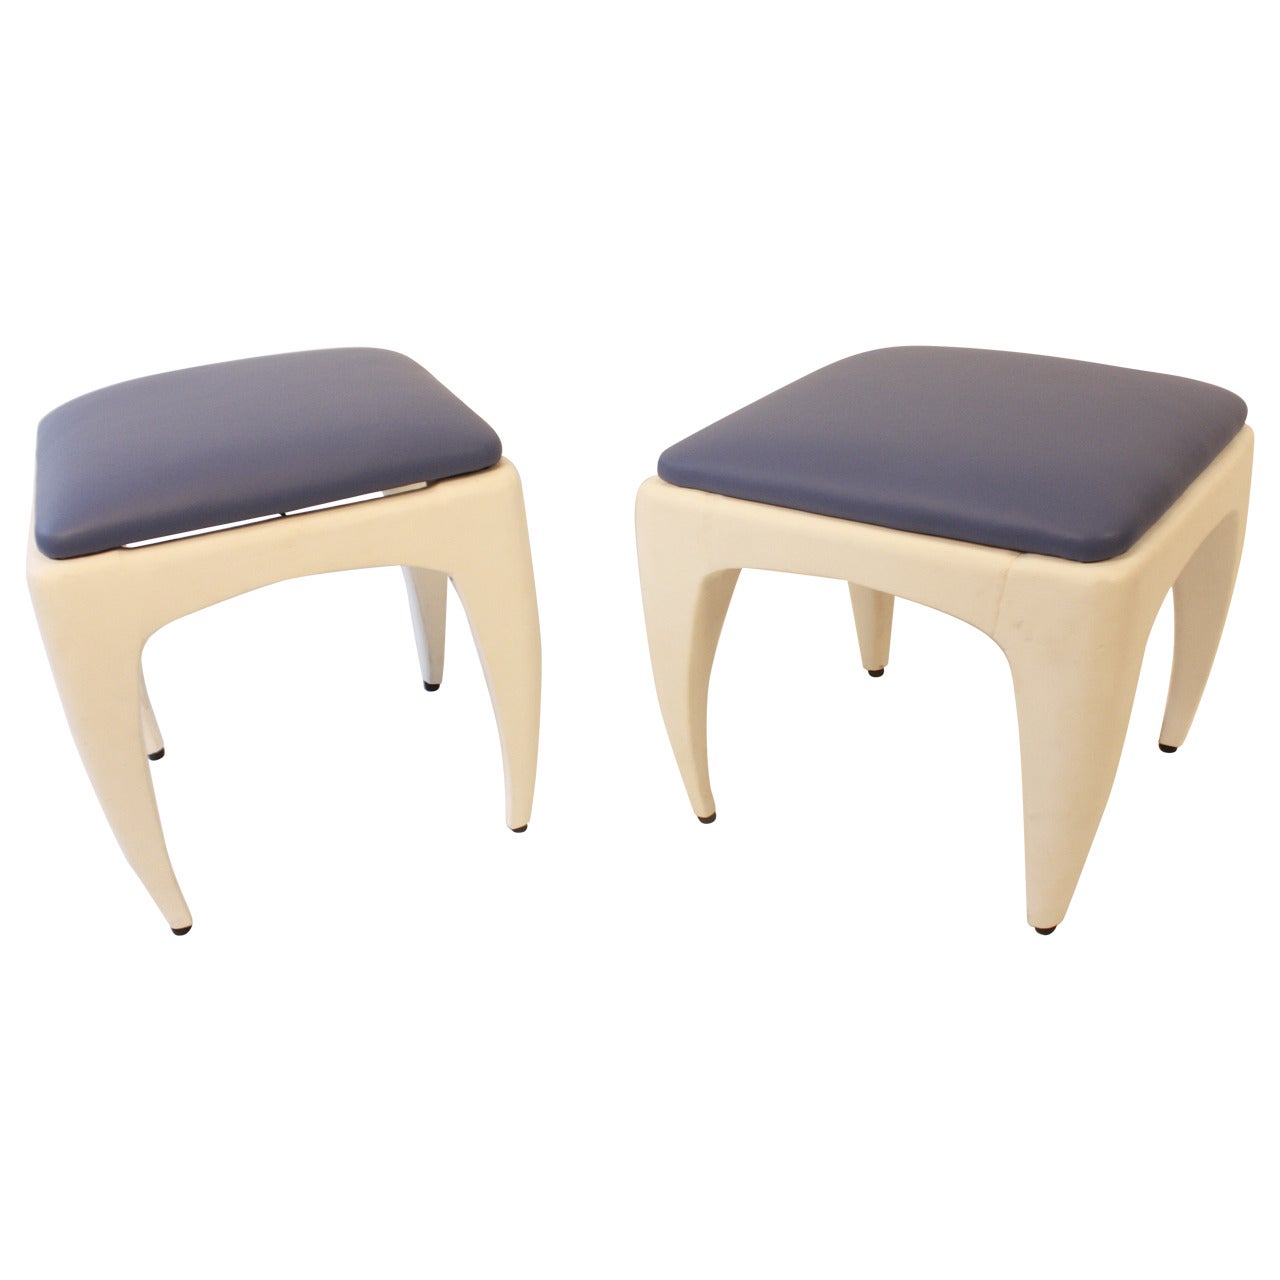 Pair of 1950s Leather Stools by G. Ulrich